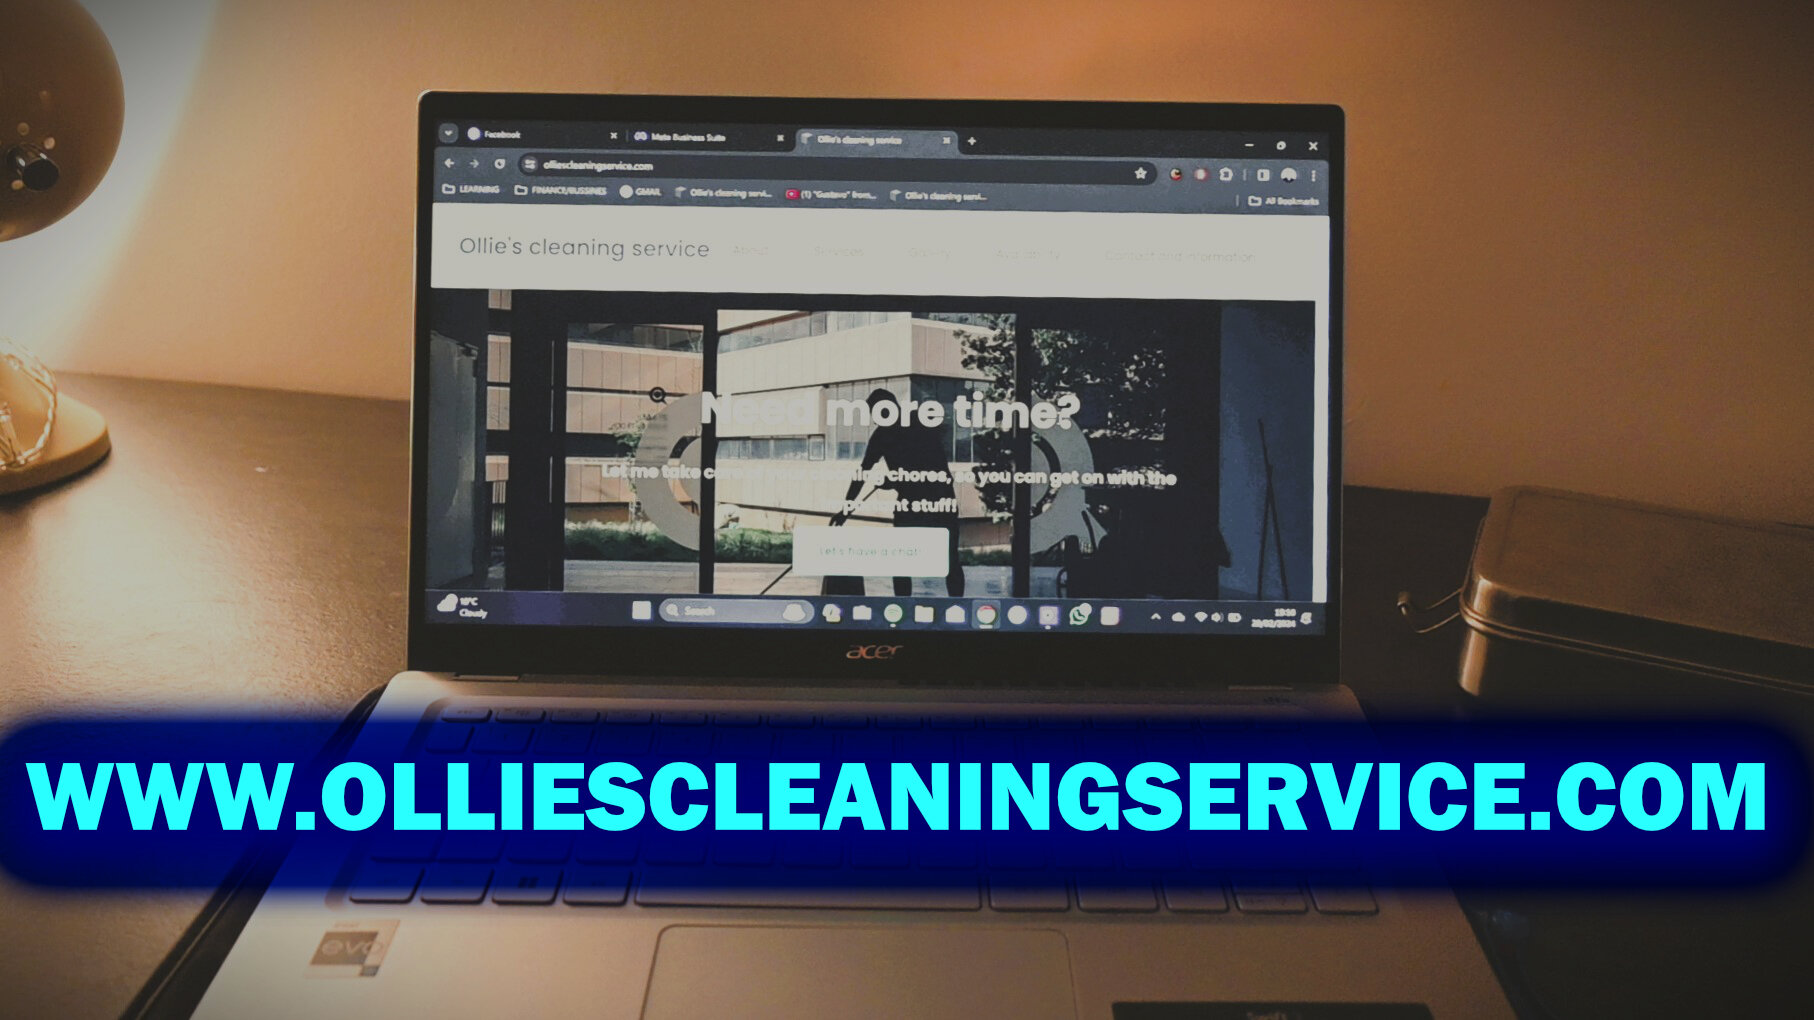 💛💚🧡🩵THE WEBSITE IS OFFICIALLY ONLINE!!🧡🩵💚💛 Everything you need to know is here and the web address is so simple to remember. 💻www.olliescleaningservice.com 💻